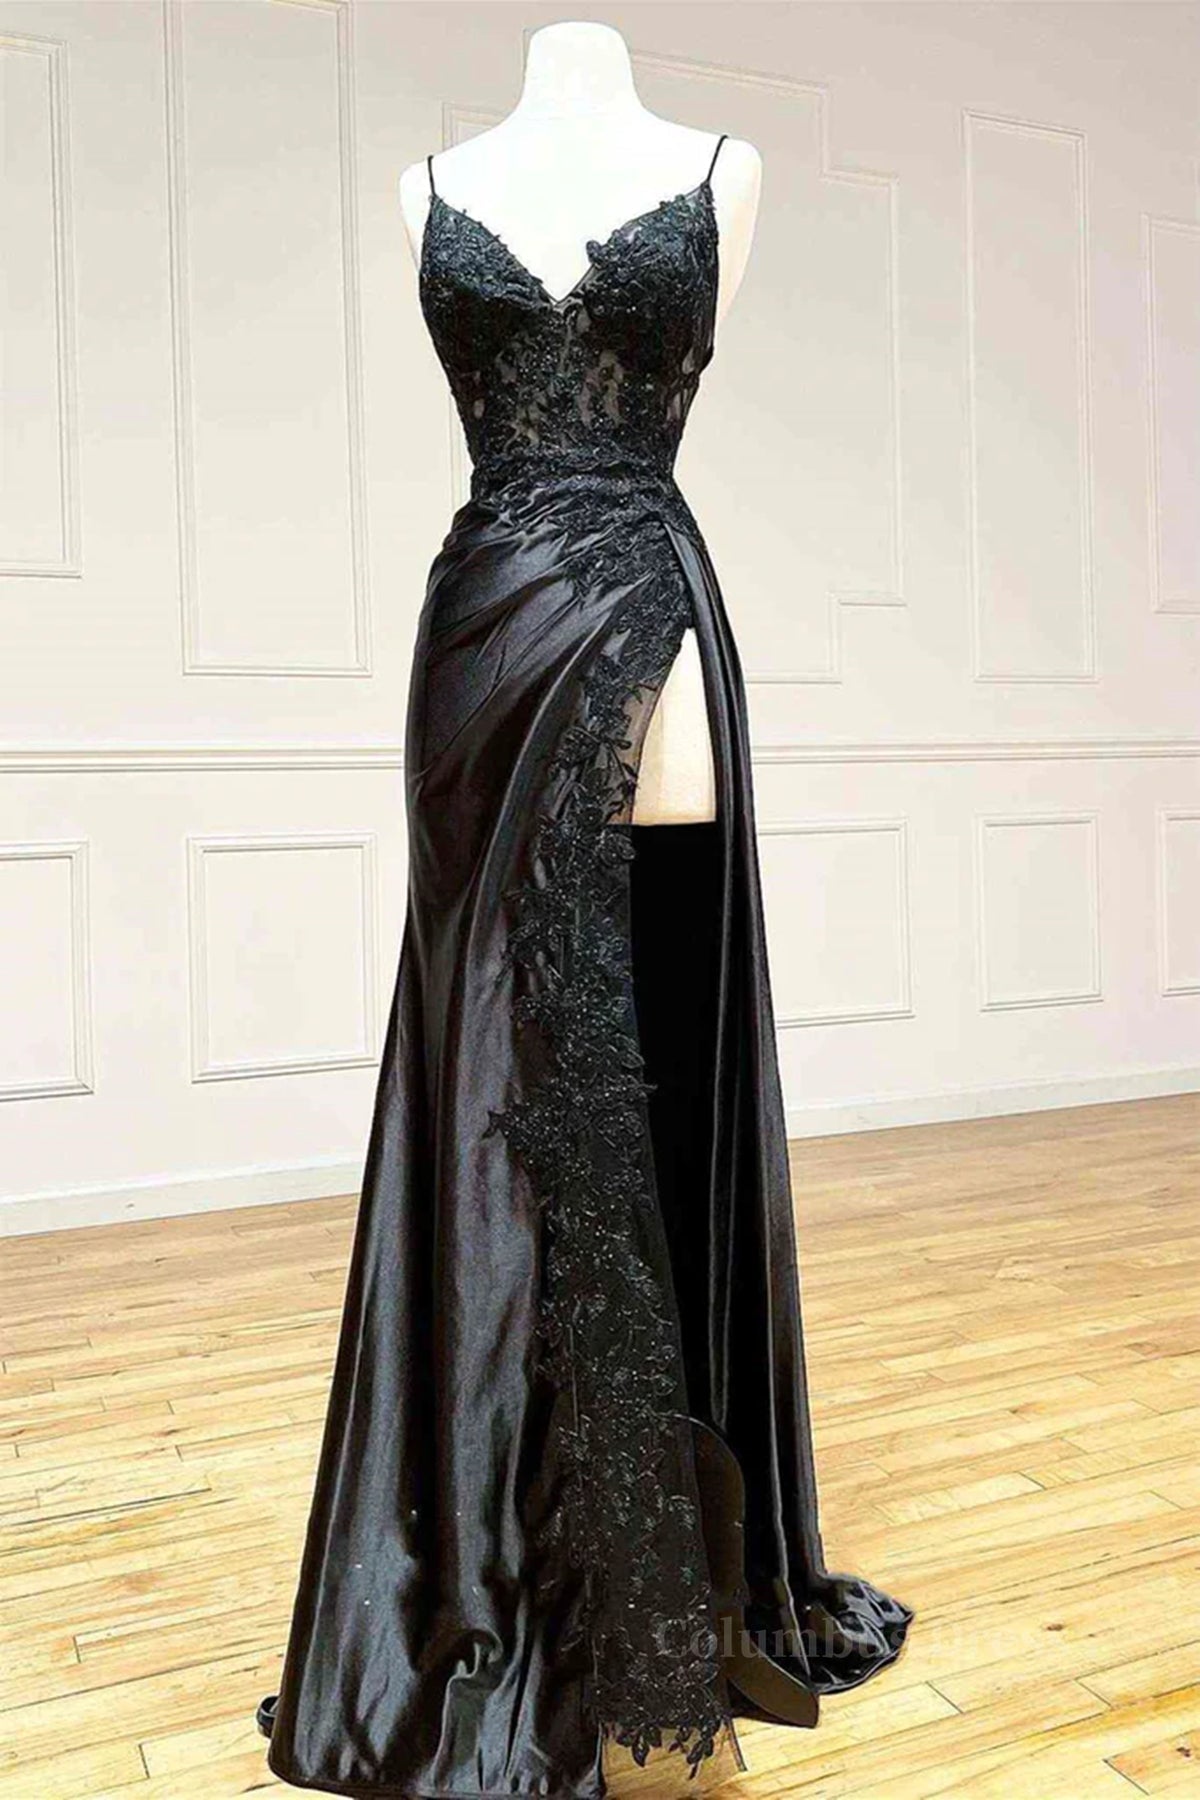 V Neck Open Back Mermaid Black Lace Long Corset Prom Dress, Mermaid Black Lace Corset Formal Dresses outfit, Elegant Gown